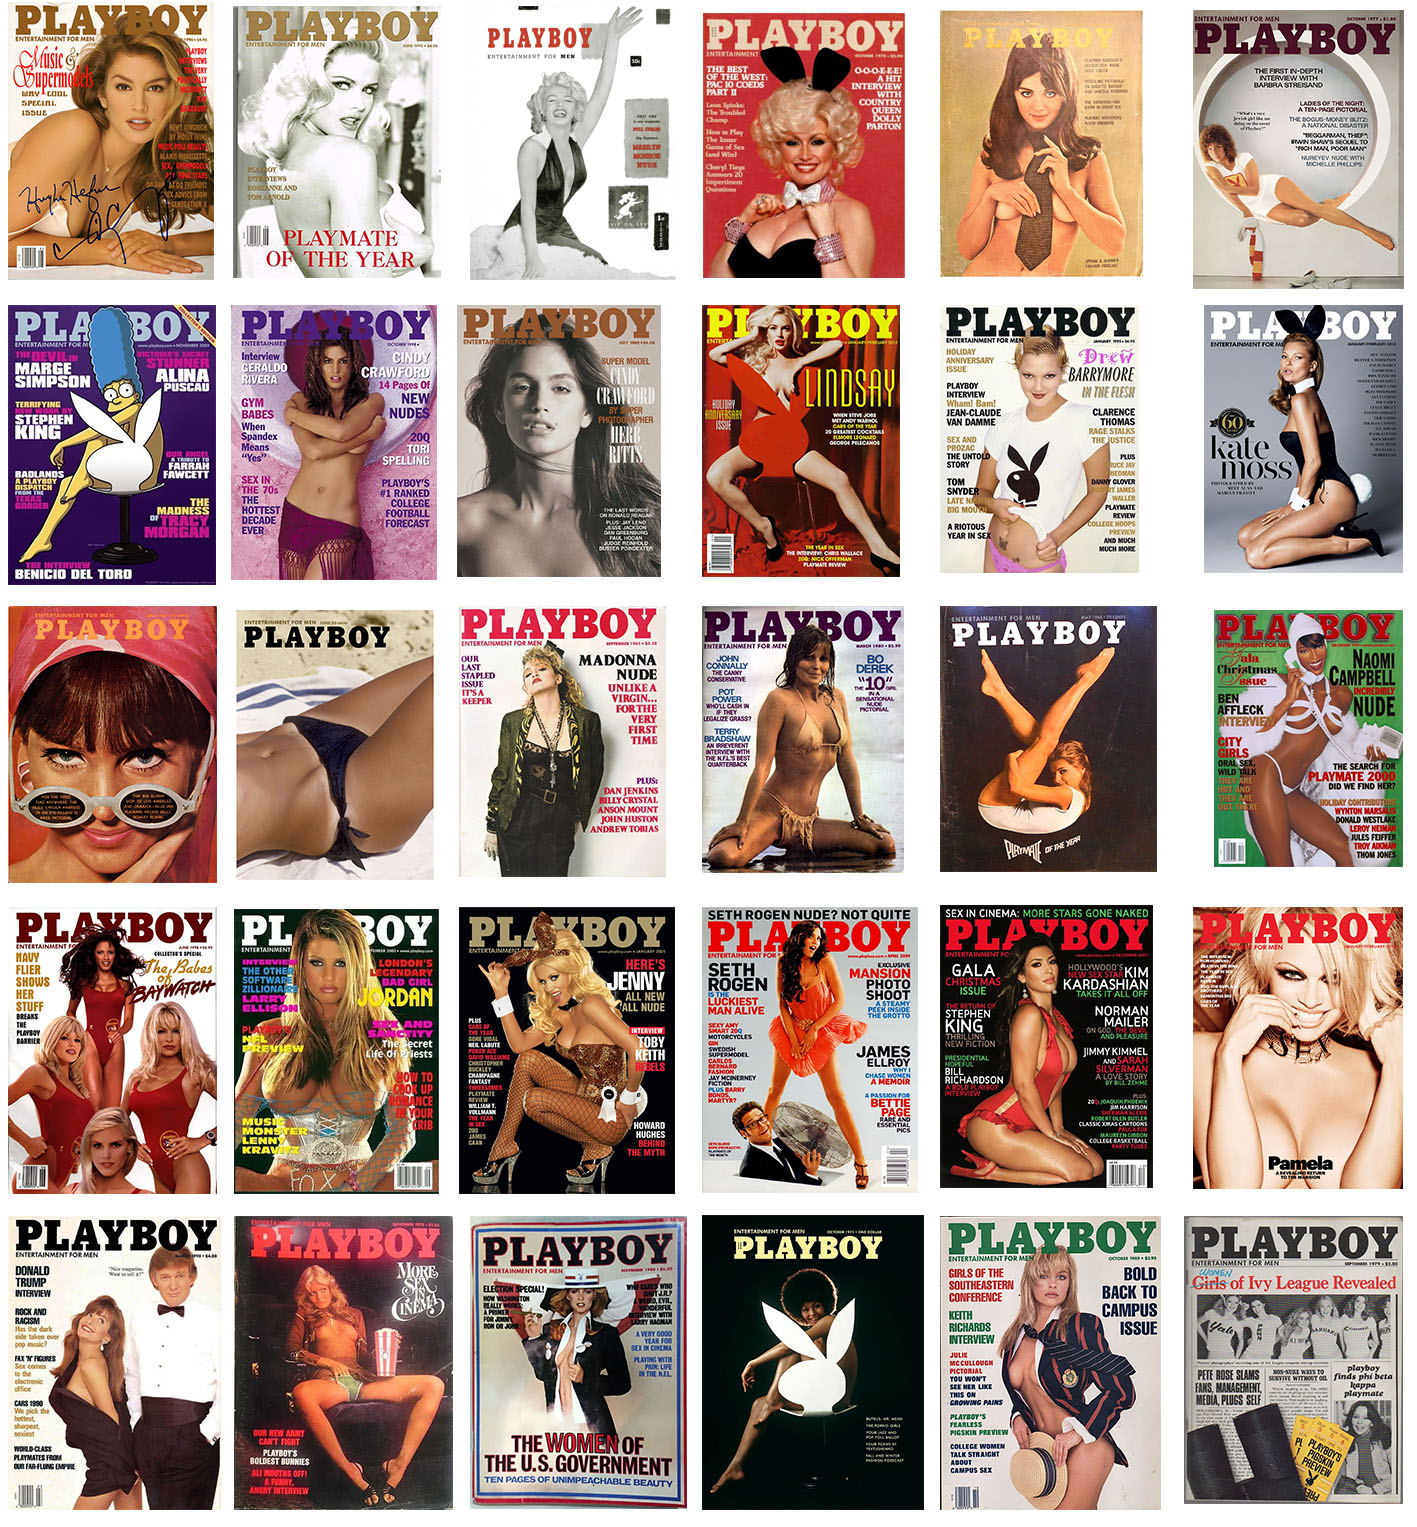 Playboy Finally Did It! , Download The Complete Playboy Digital Magazine Collection (1953 - 2020) 10